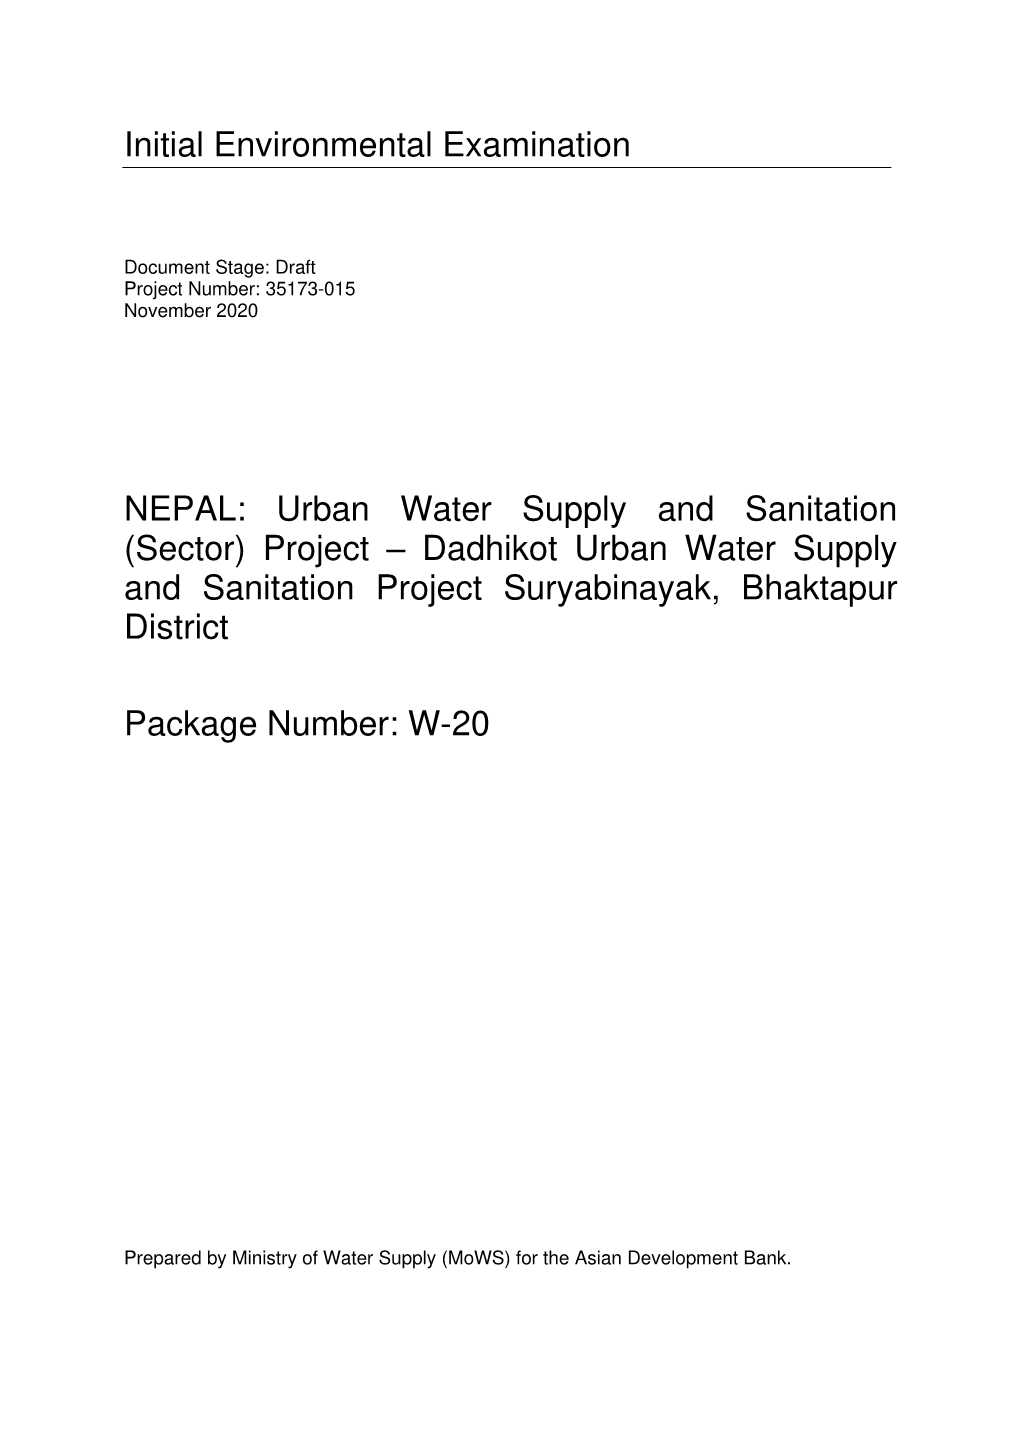 Urban Water Supply and Sanitation Sector Project (UWSSP)